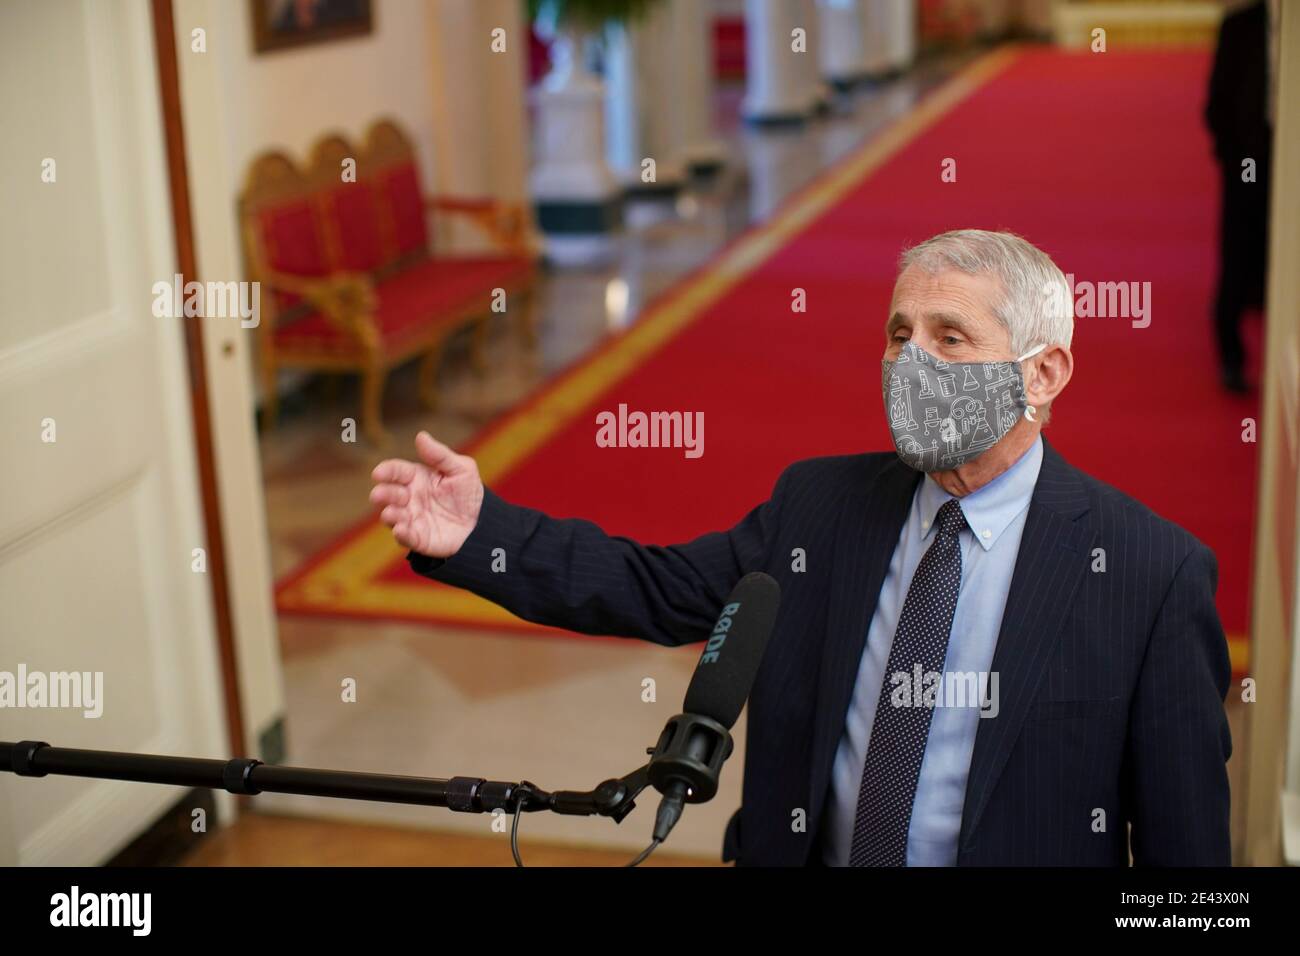 Anthony Fauci, director of the National Institute of Allergy and Infectious Diseases, speaks to members of the media before an event on the Biden administration's Covid-19 response in the State Dining Room of the White House in Washington, DC, U.S., on Thursday, Jan. 21, 2021. Biden in his first full day in office plans to issue a sweeping set of executive orders to tackle the raging Covid-19 pandemic that will rapidly reverse or refashion many of his predecessor's most heavily criticized policies. Credit: Al Drago/Pool via CNP | usage worldwide Stock Photo